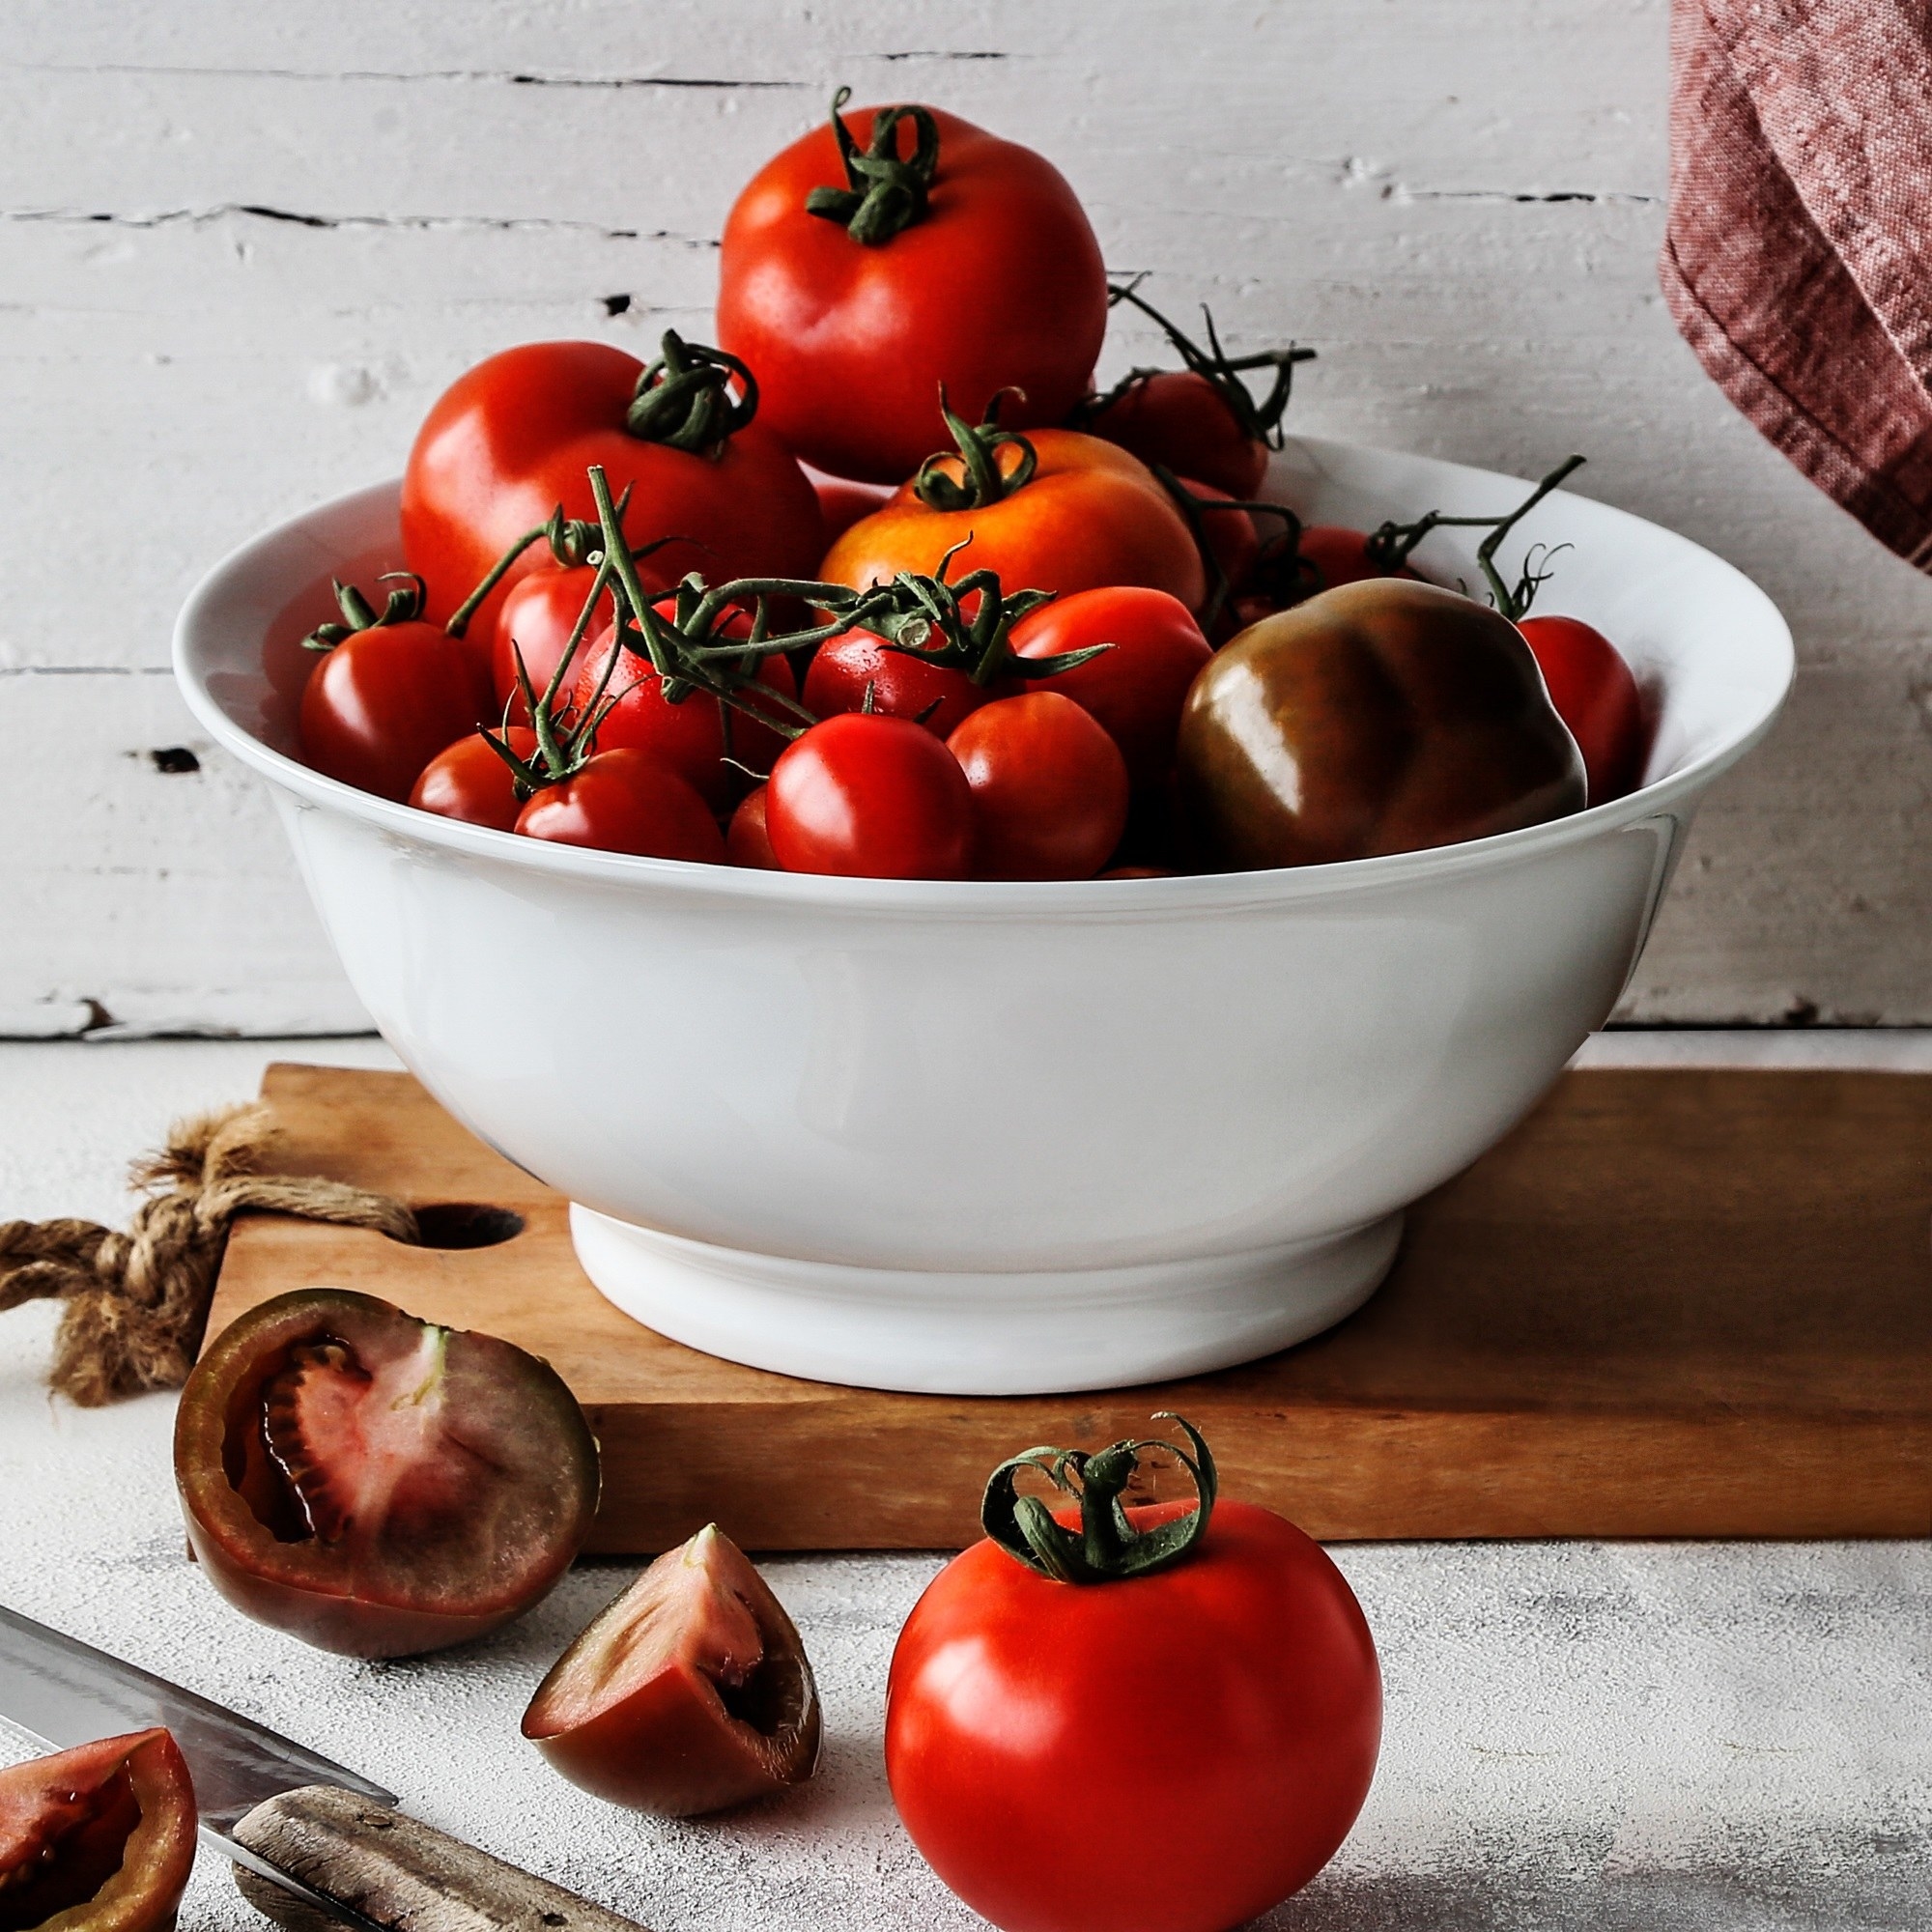 A large white bowl full of tomatoes